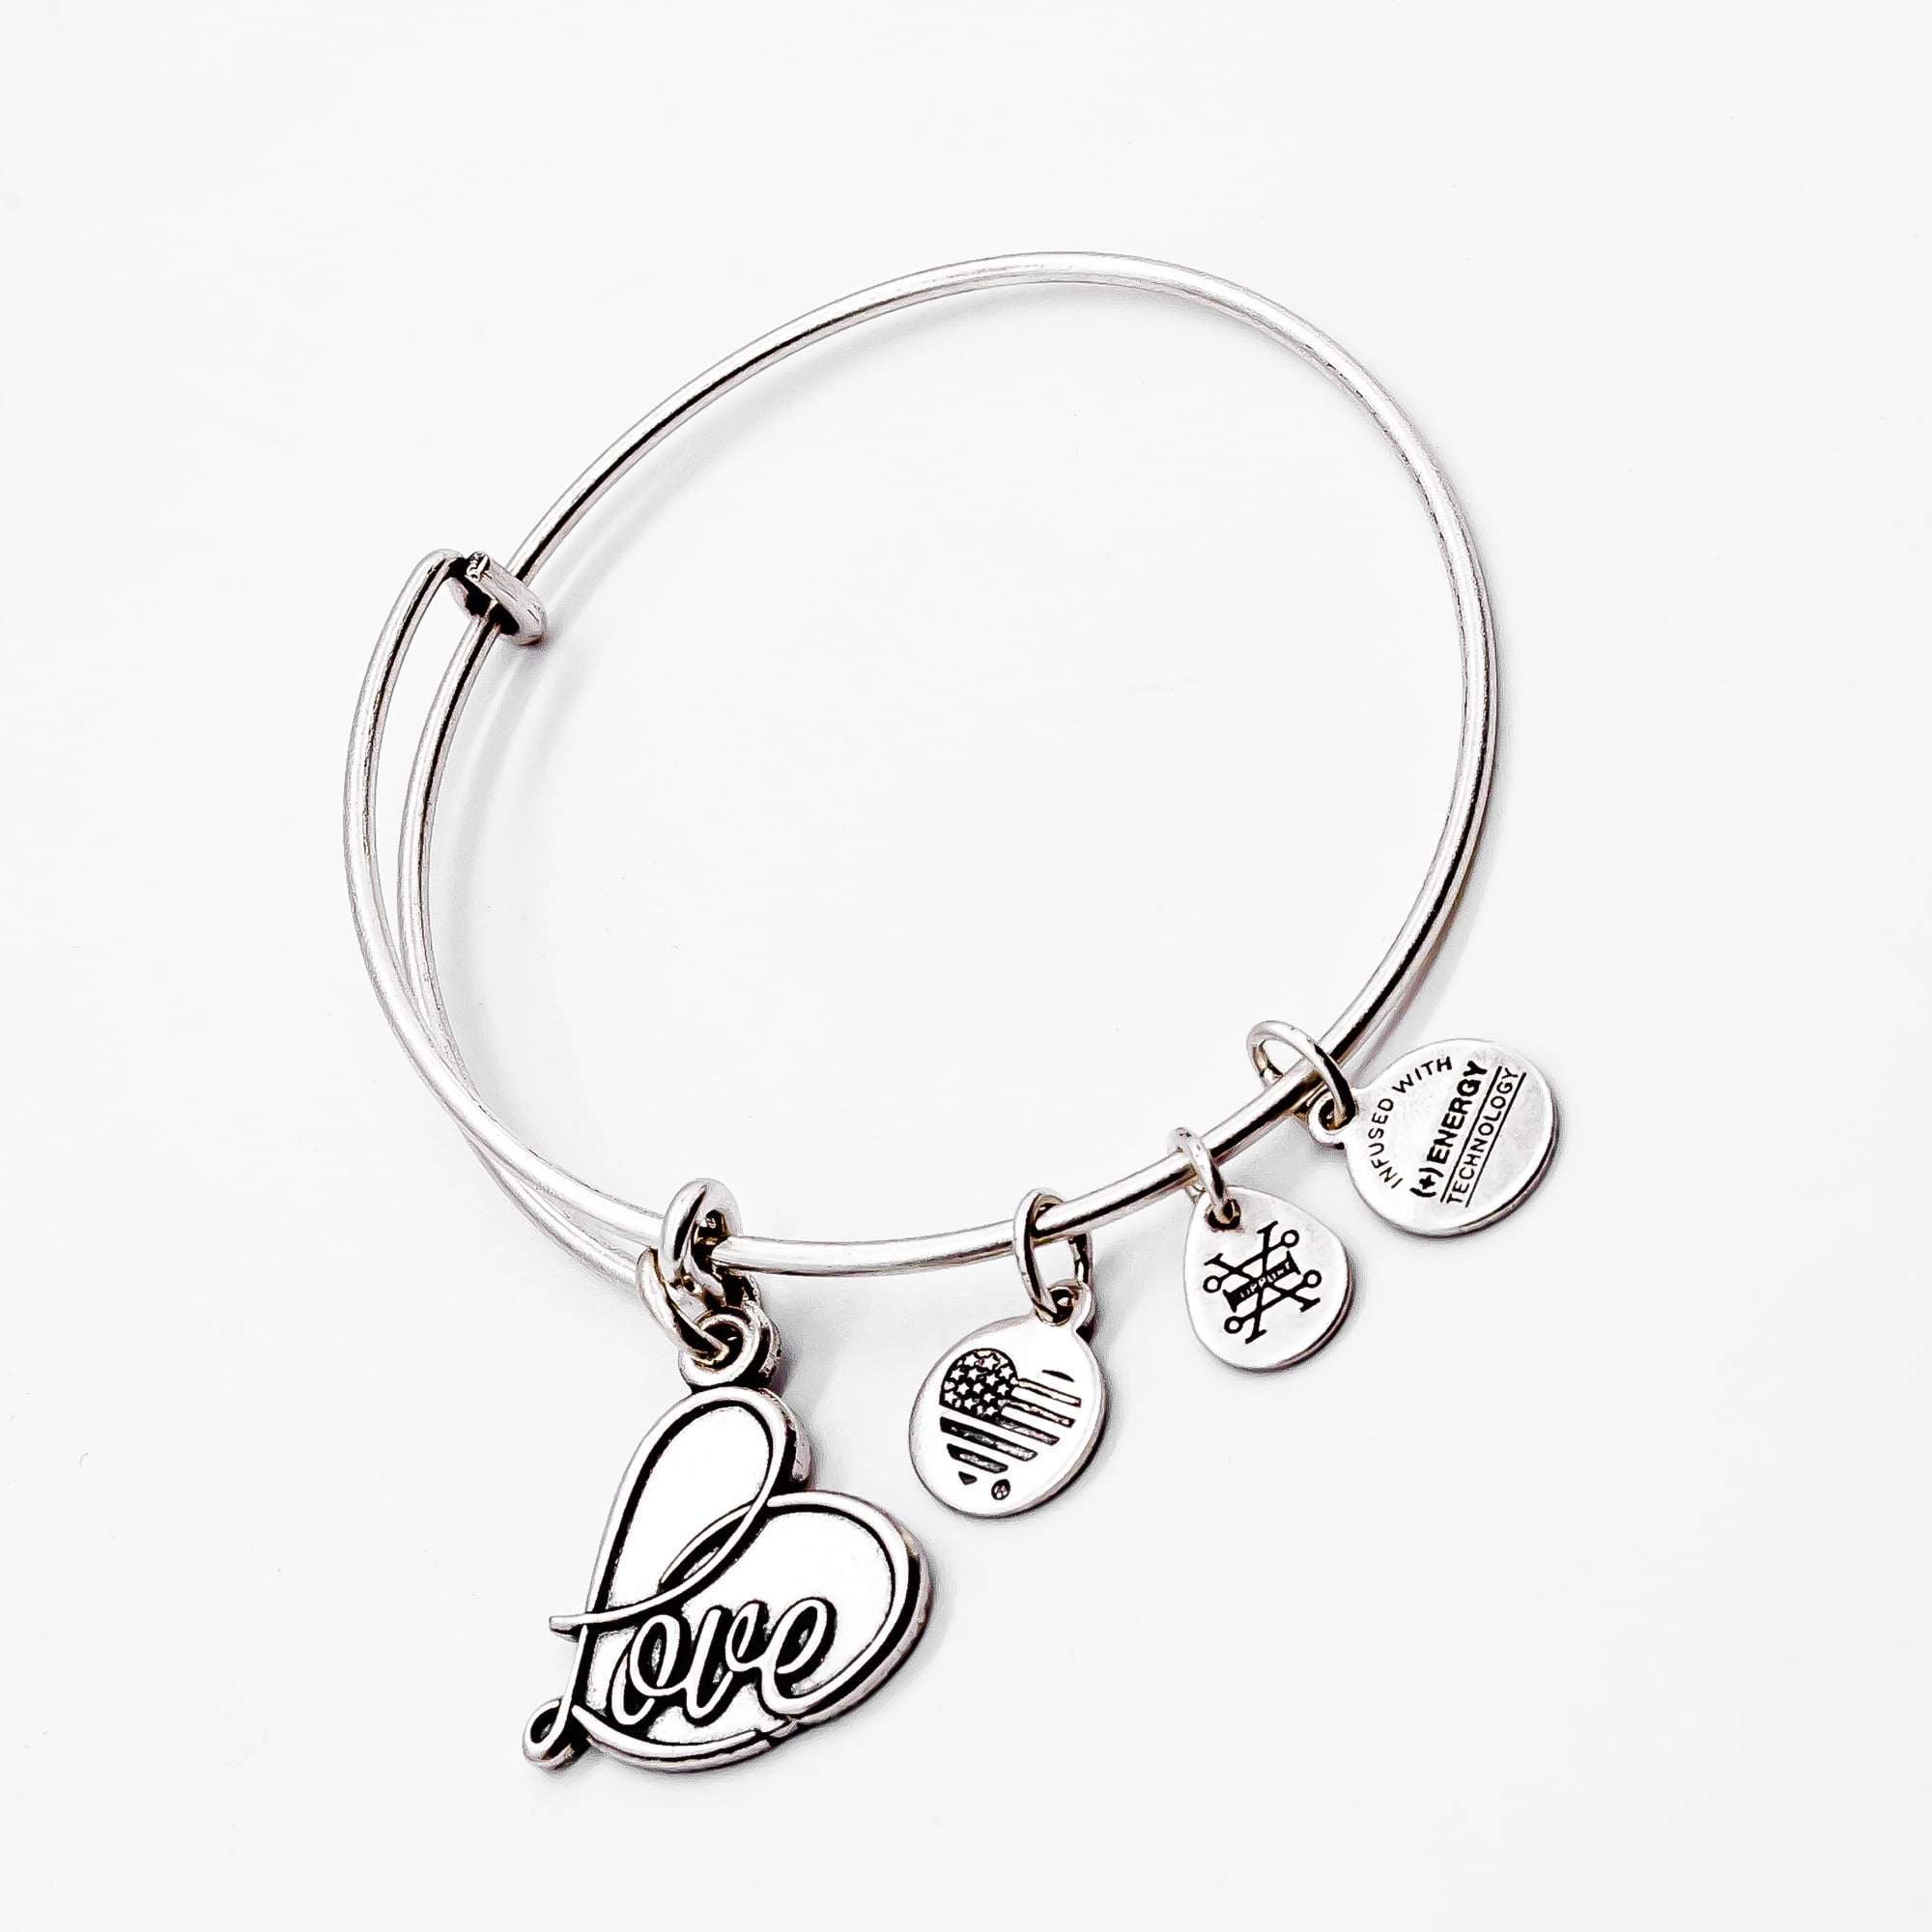 AUTHENTIC ALEX AND ANI SWEET LOVE HEART SET OF 3 SILVER EXPANDABLE CHARM BANGLE